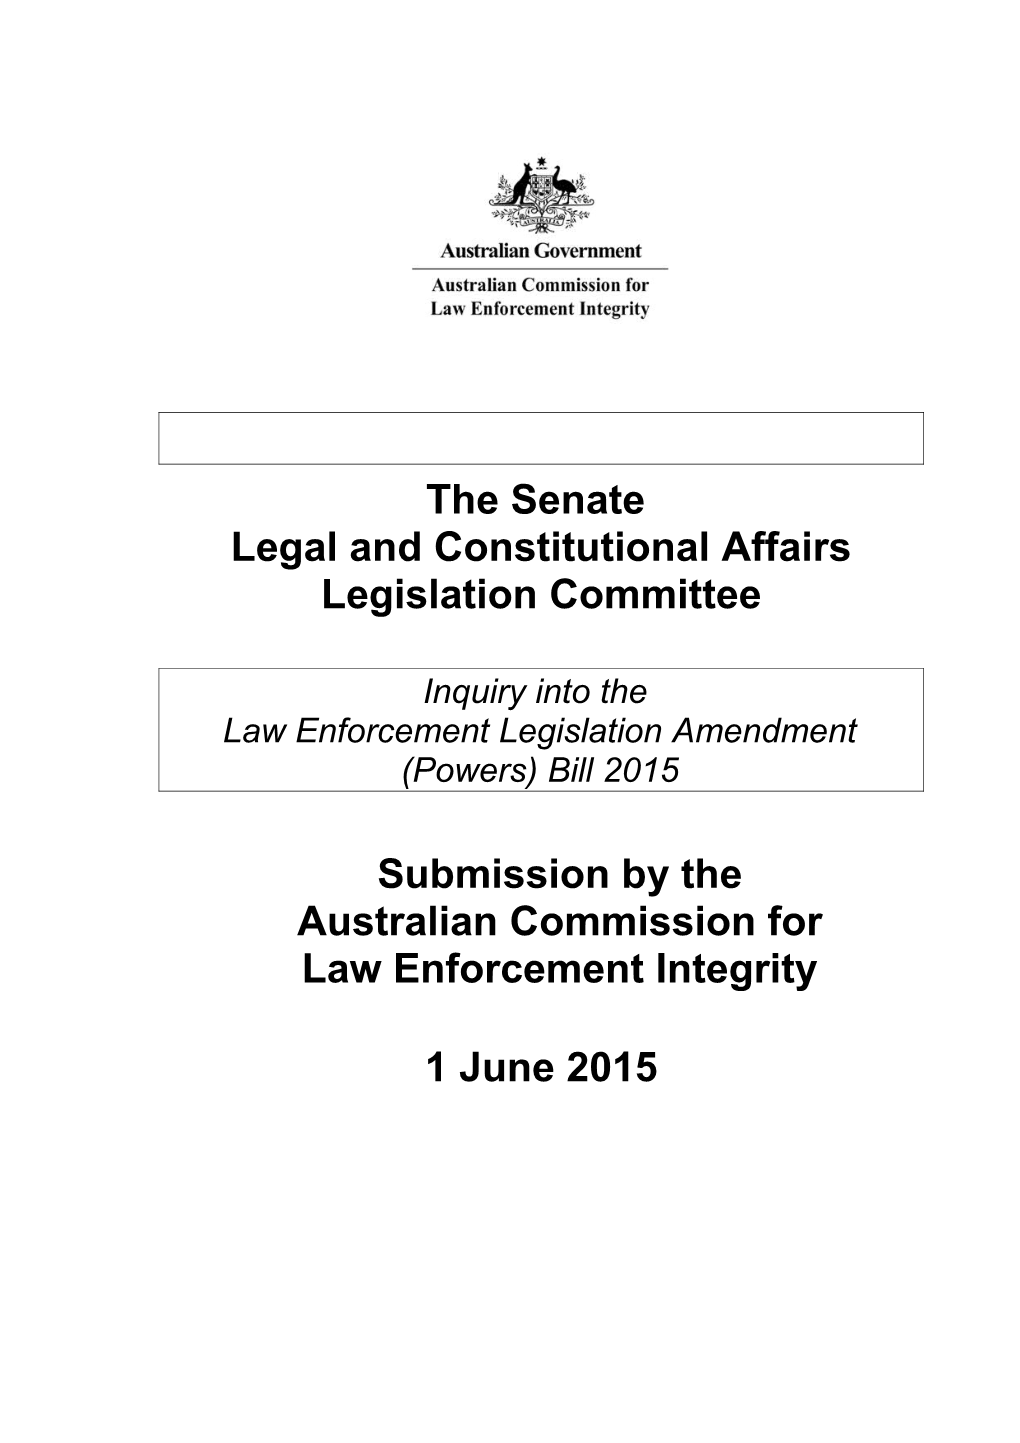 Submission by the Australian Commission for Law Enforcement Integrity